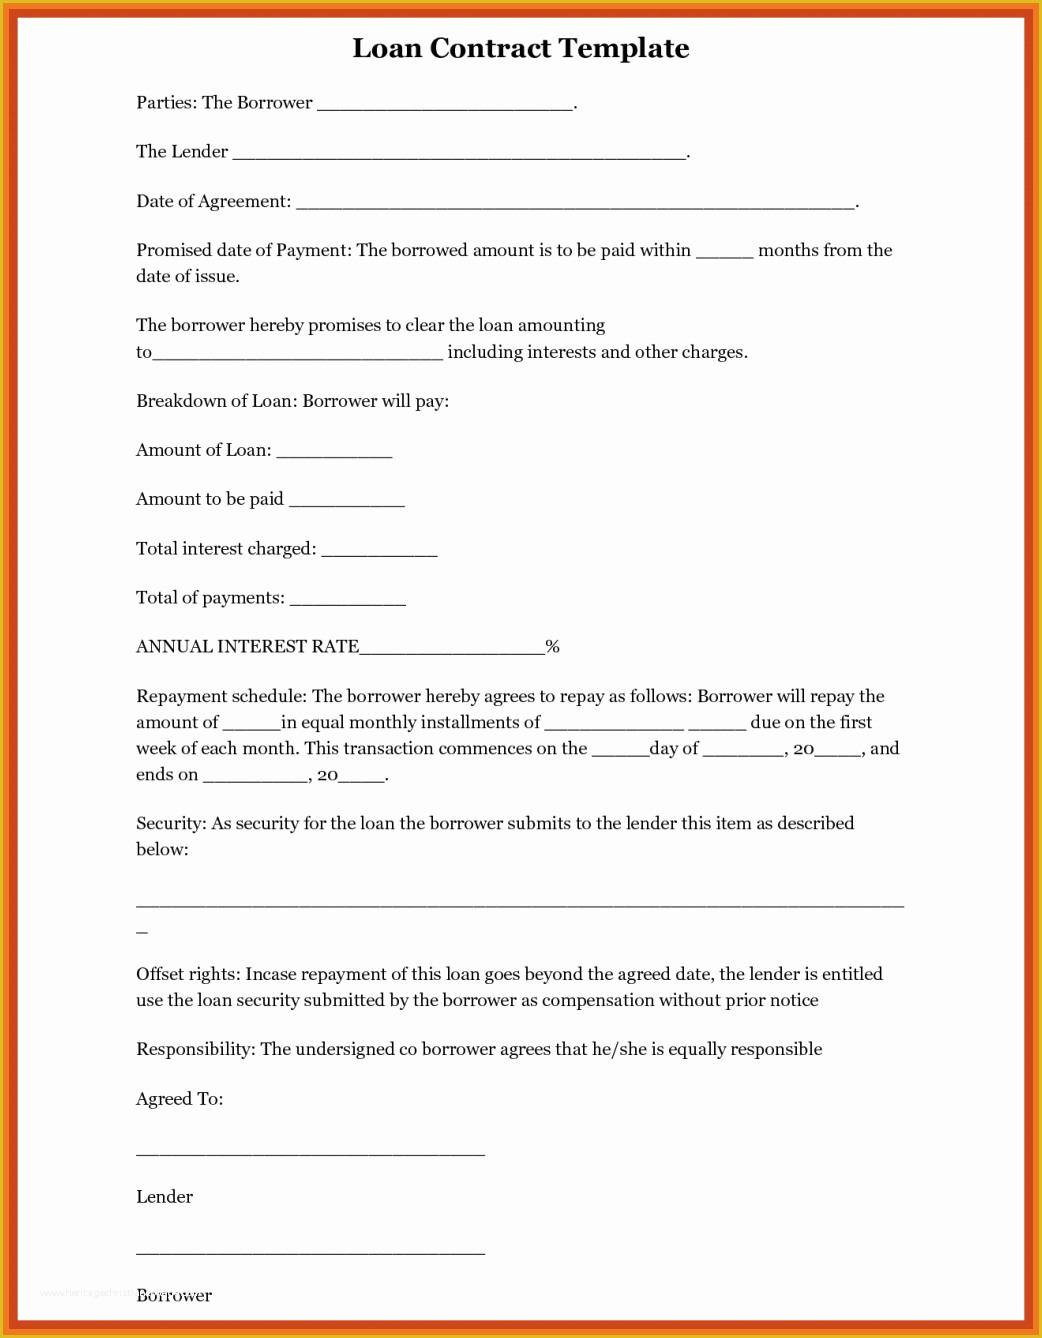 Free Template for Loan Agreement Between Friends Of 9 10 Sample Personal Loan Agreement